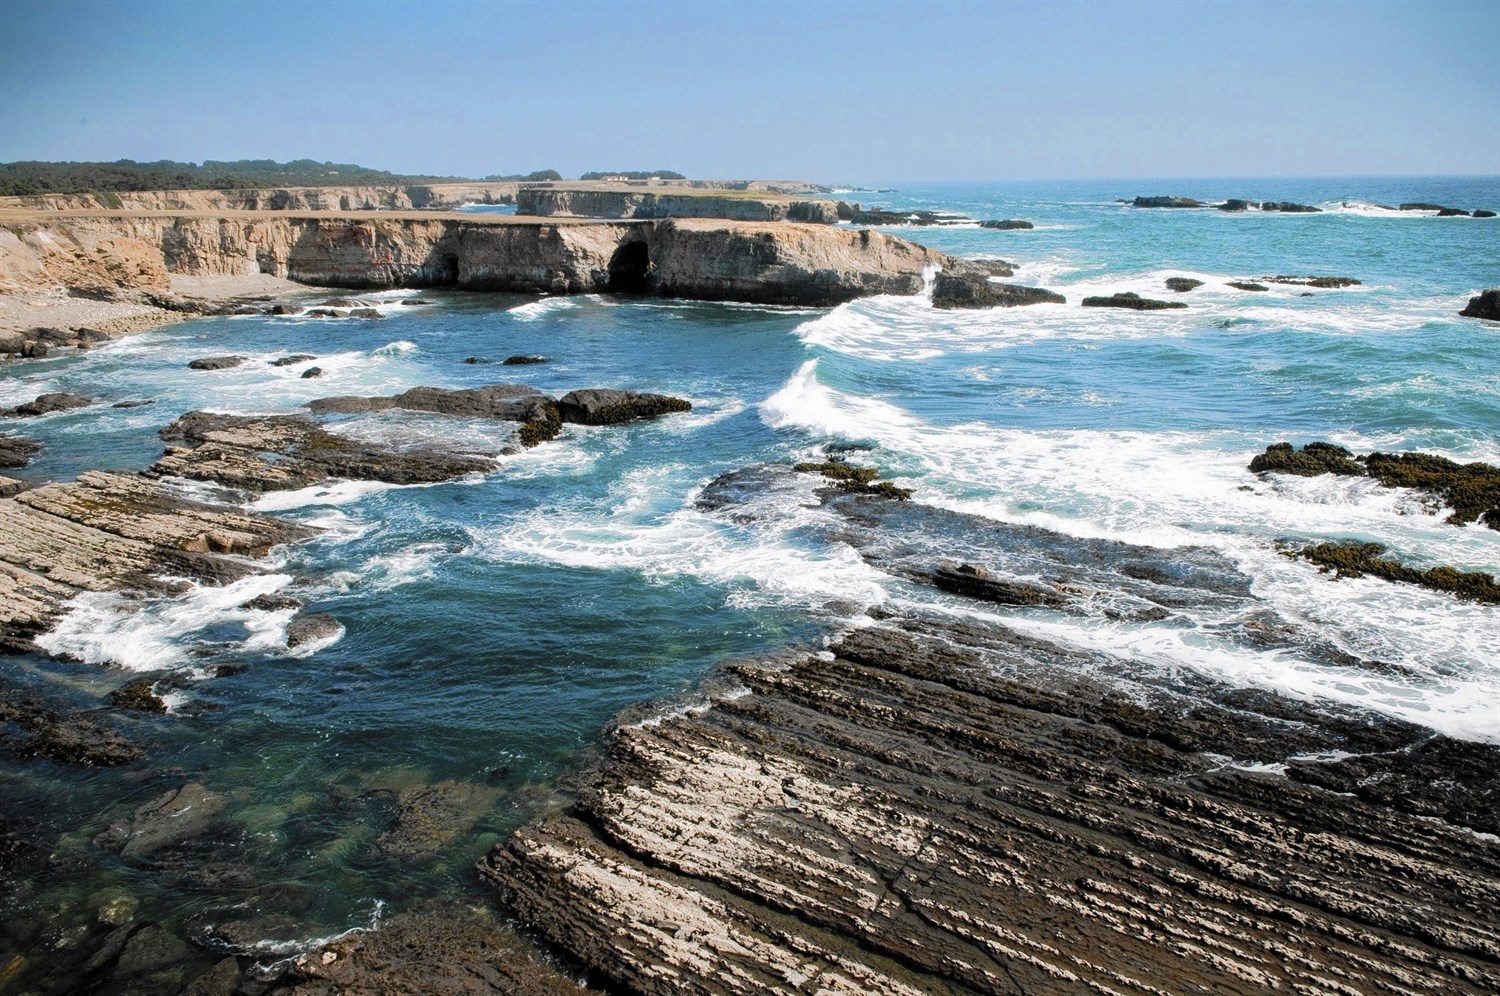 The California Coastal National Monument has been